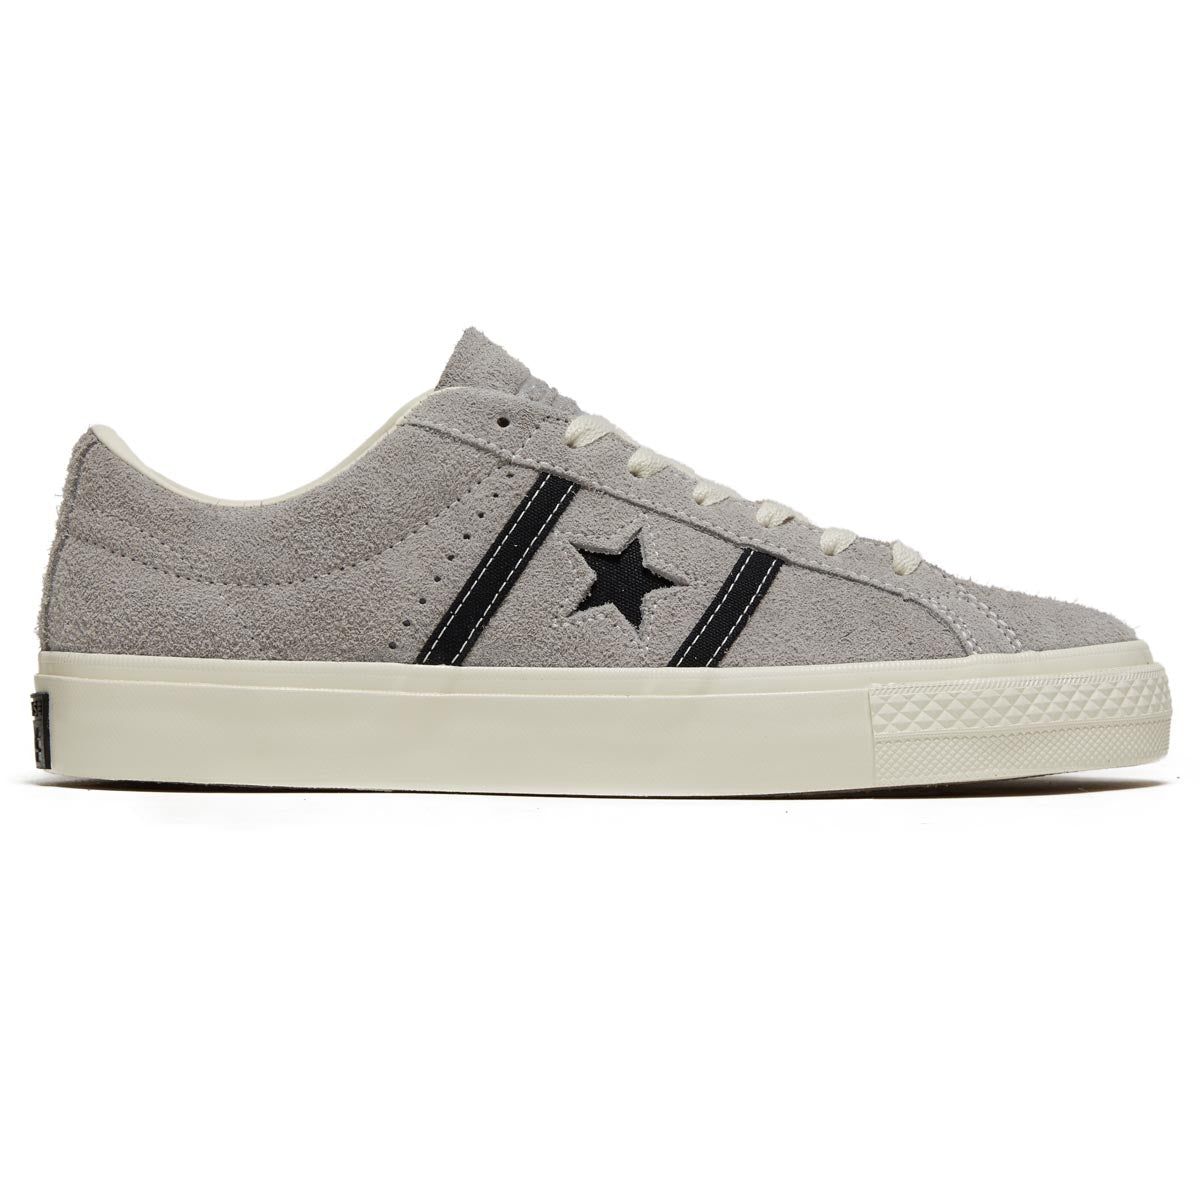 Converse One Star Academy Pro Shoes - Totally Neutral/Black/Egret image 1